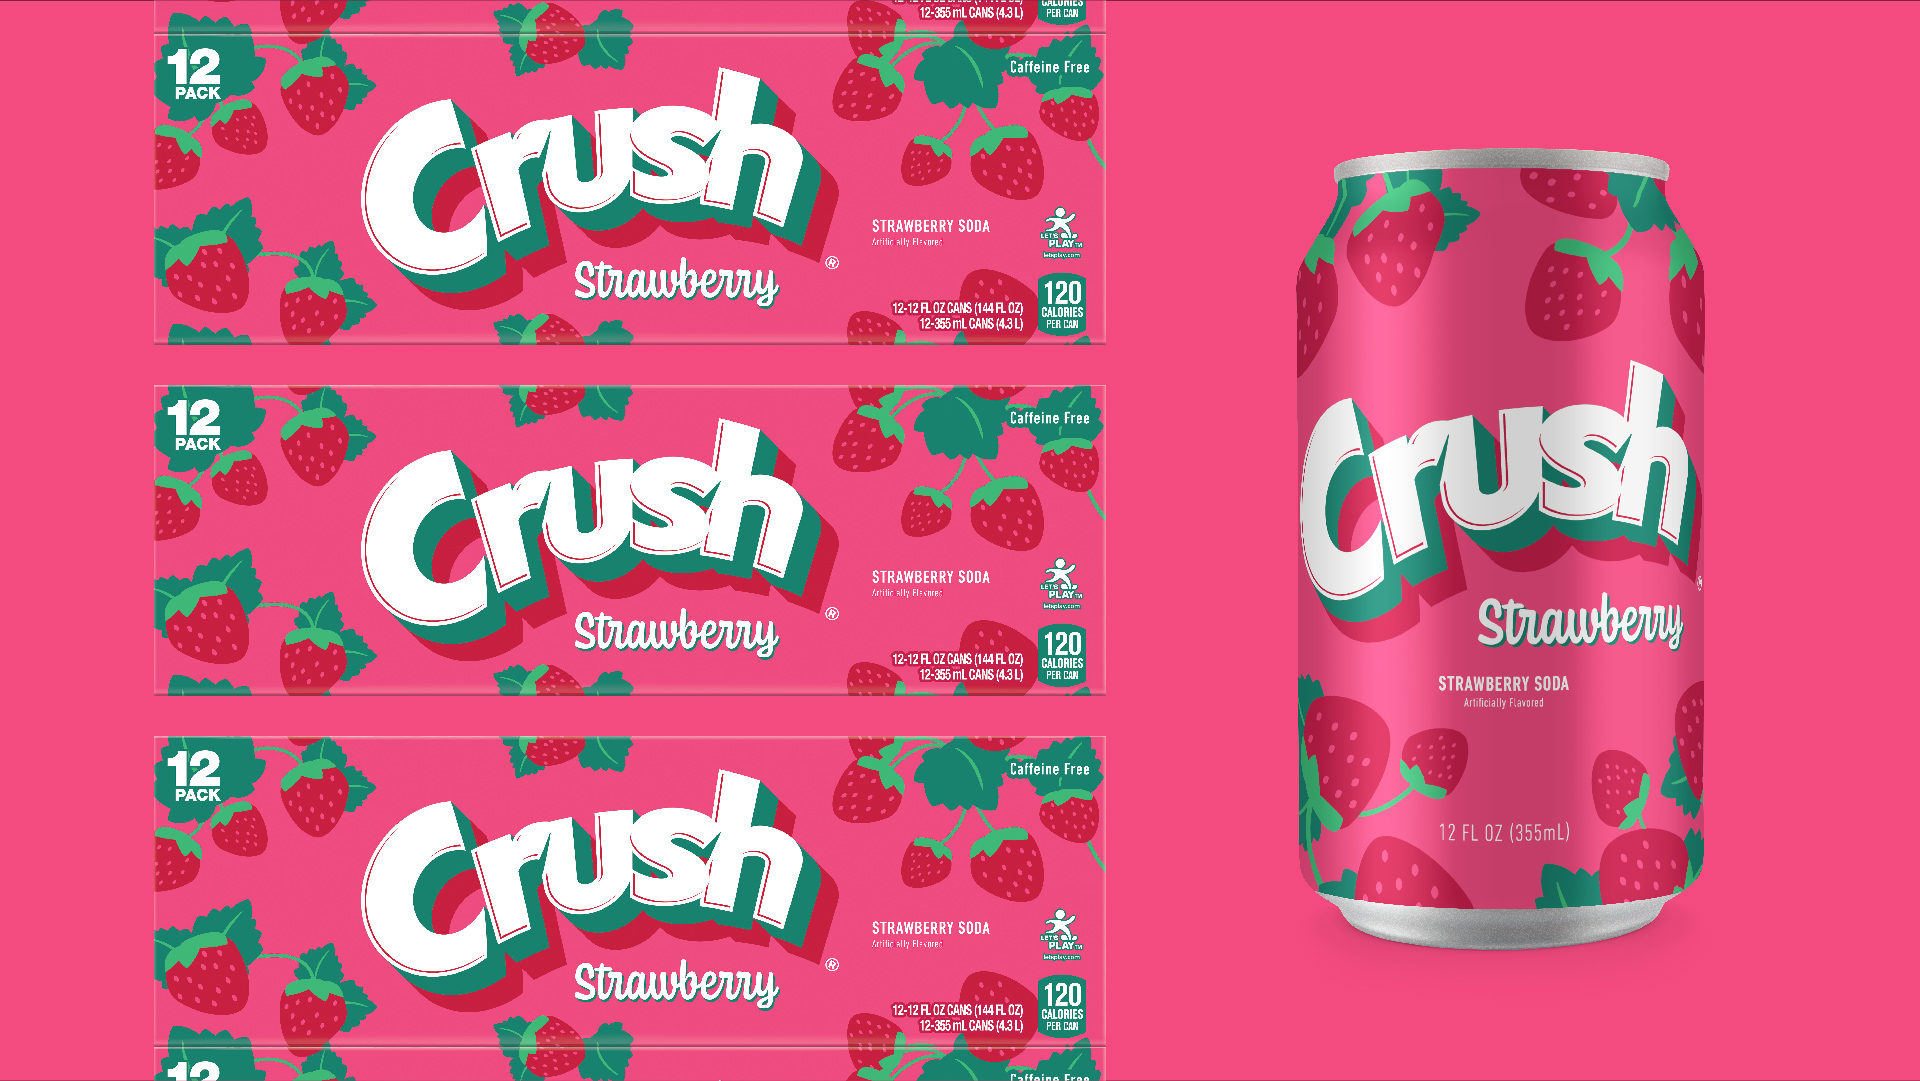 Bid Smart: Nothing can quench collectors' crush on Crush soda